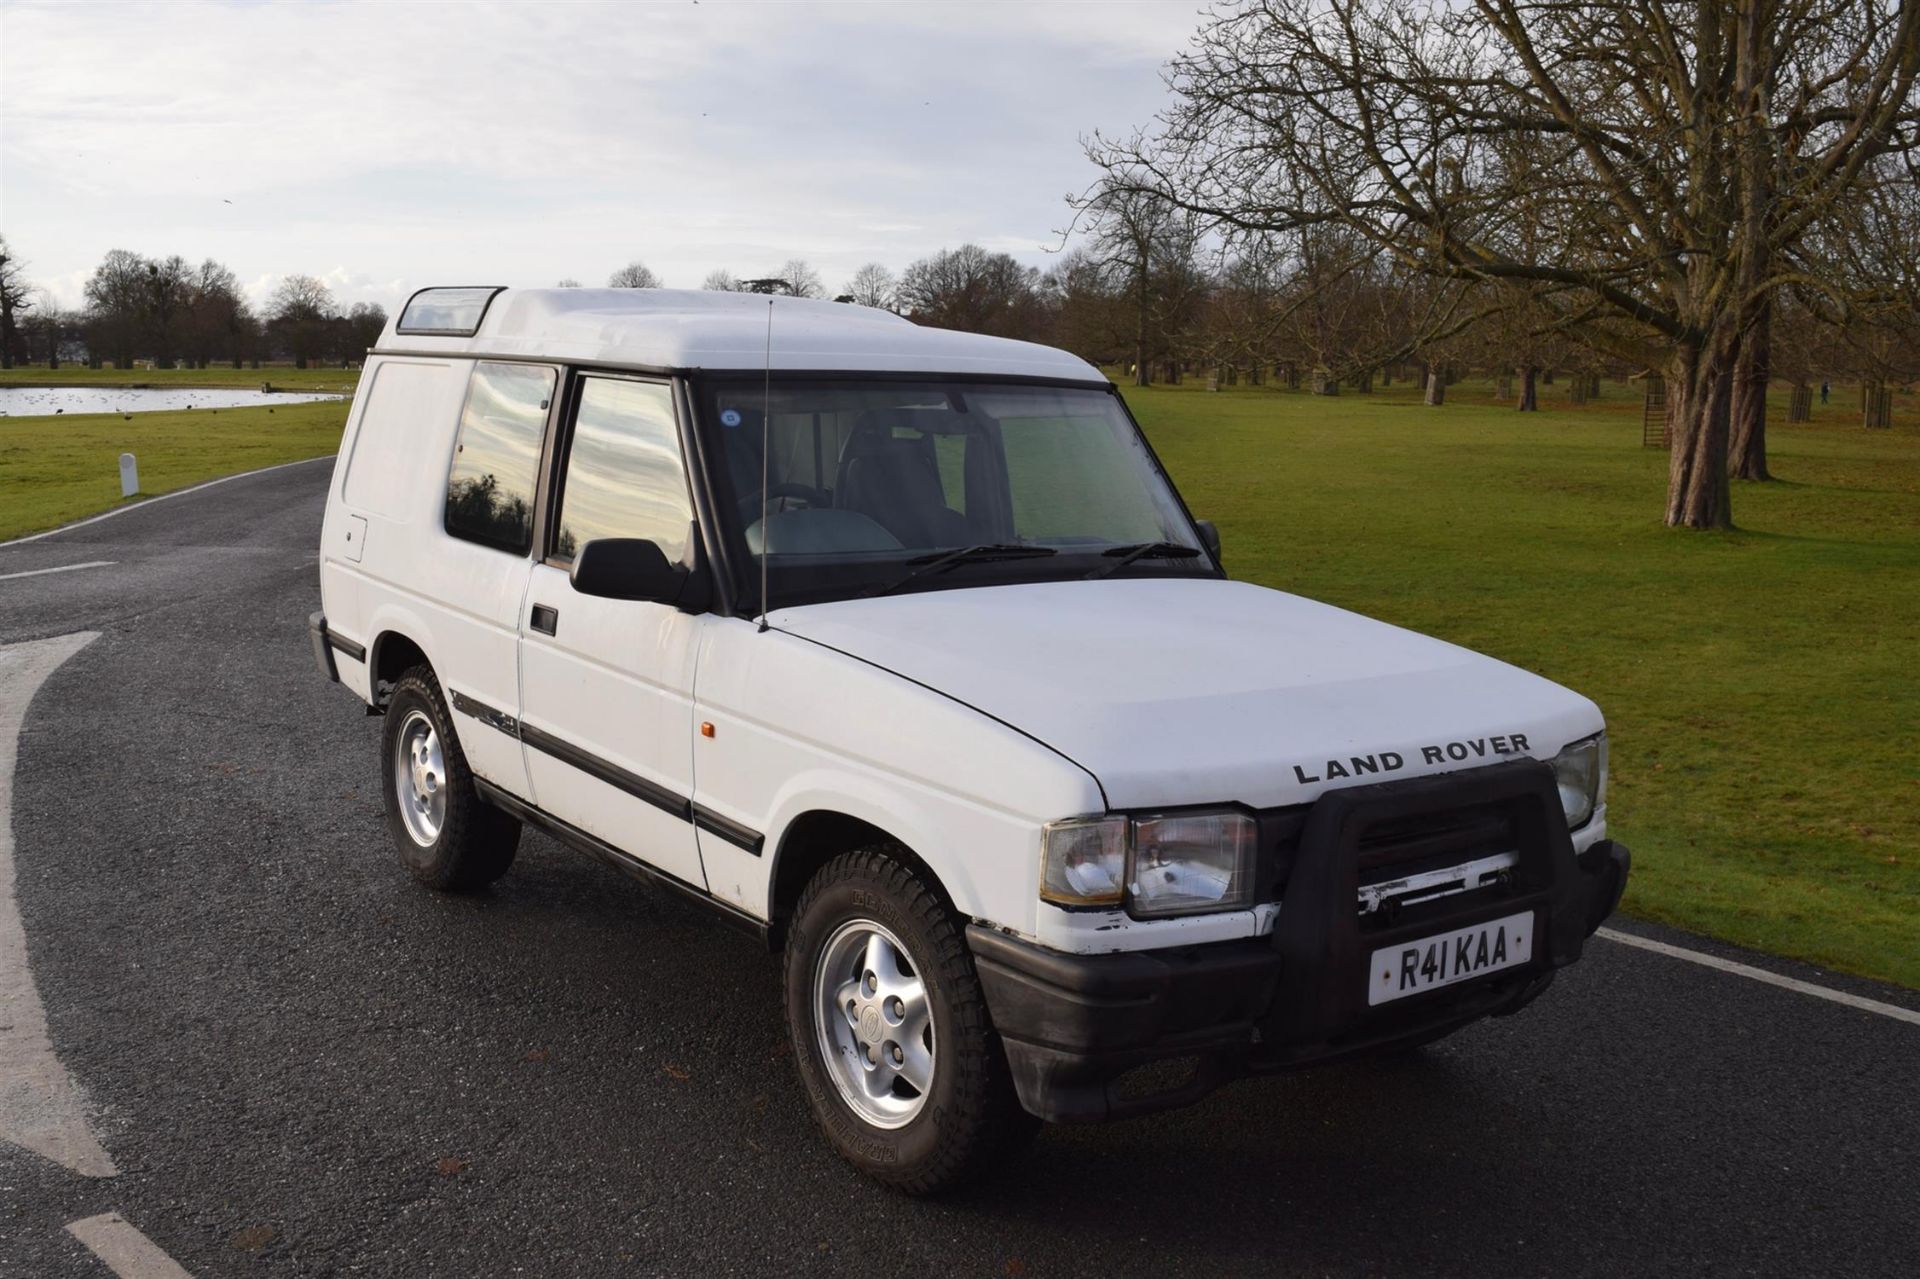 1998 Land Rover Discovery 2-Door R41 KAA. 2-door Land Rover Discovery 300 TDI, which was first - Image 35 of 41